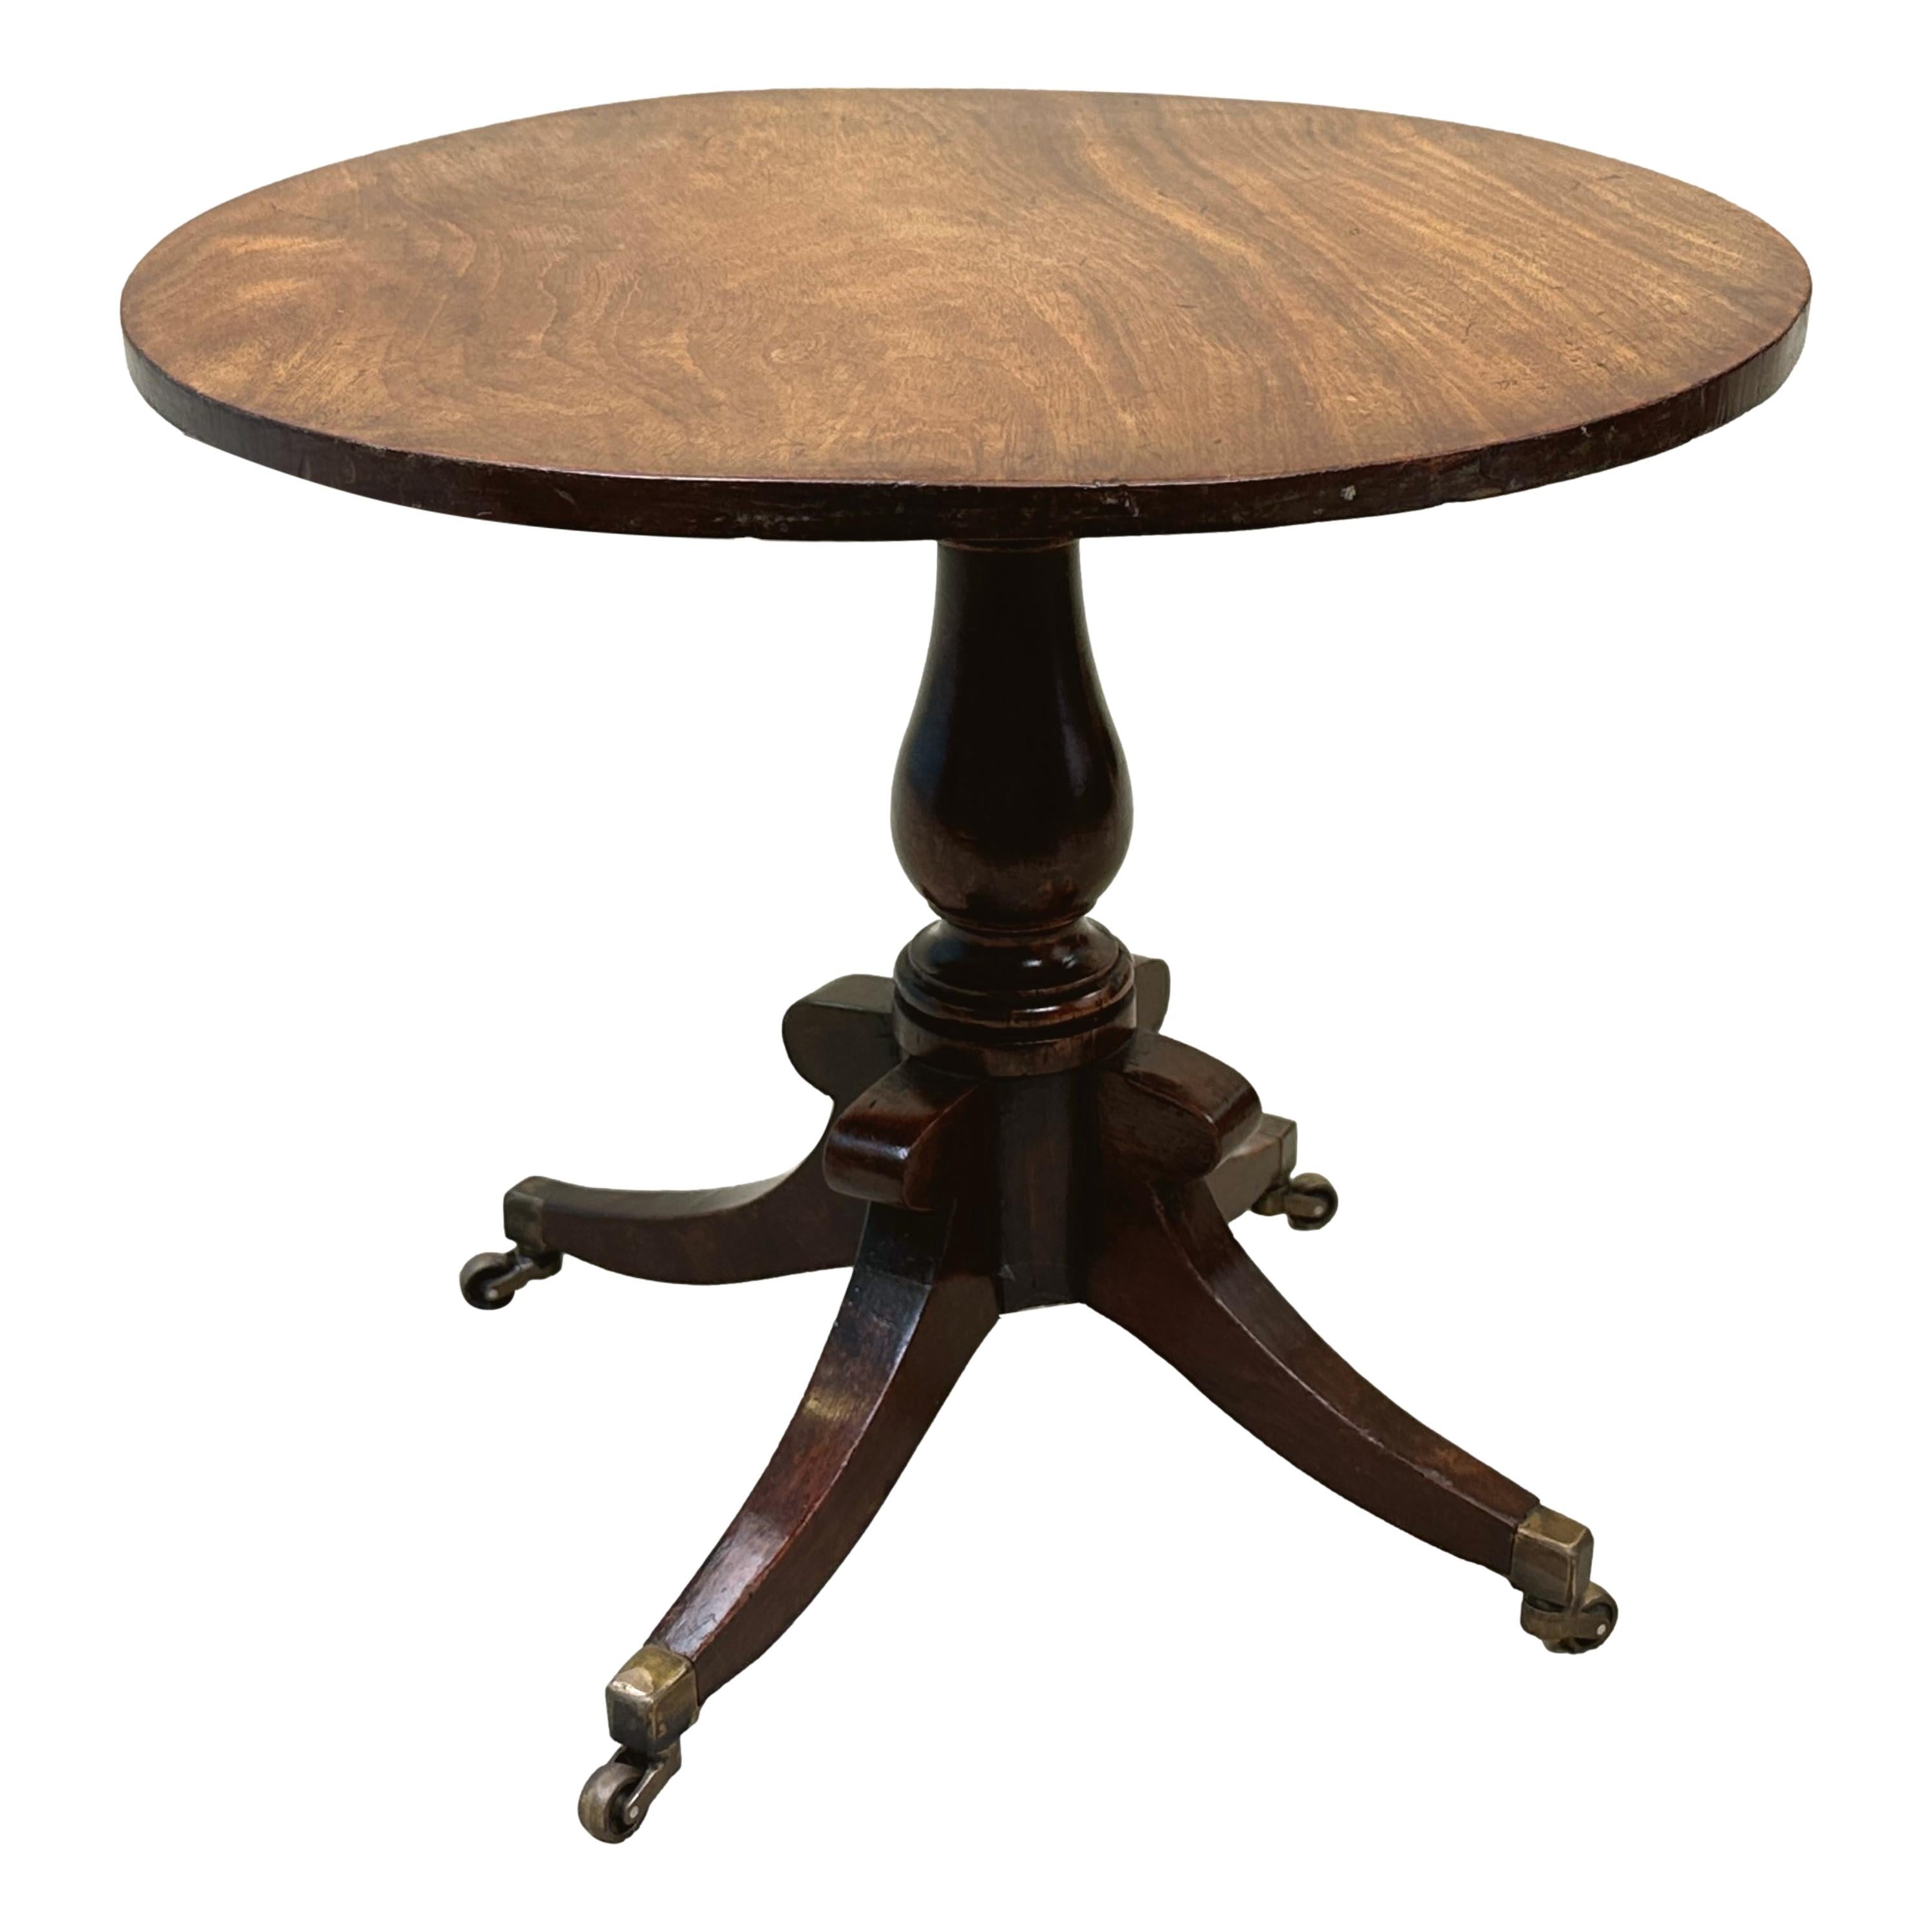 Regency Miniature Mahogany Breakfast Table In Good Condition For Sale In Bedfordshire, GB